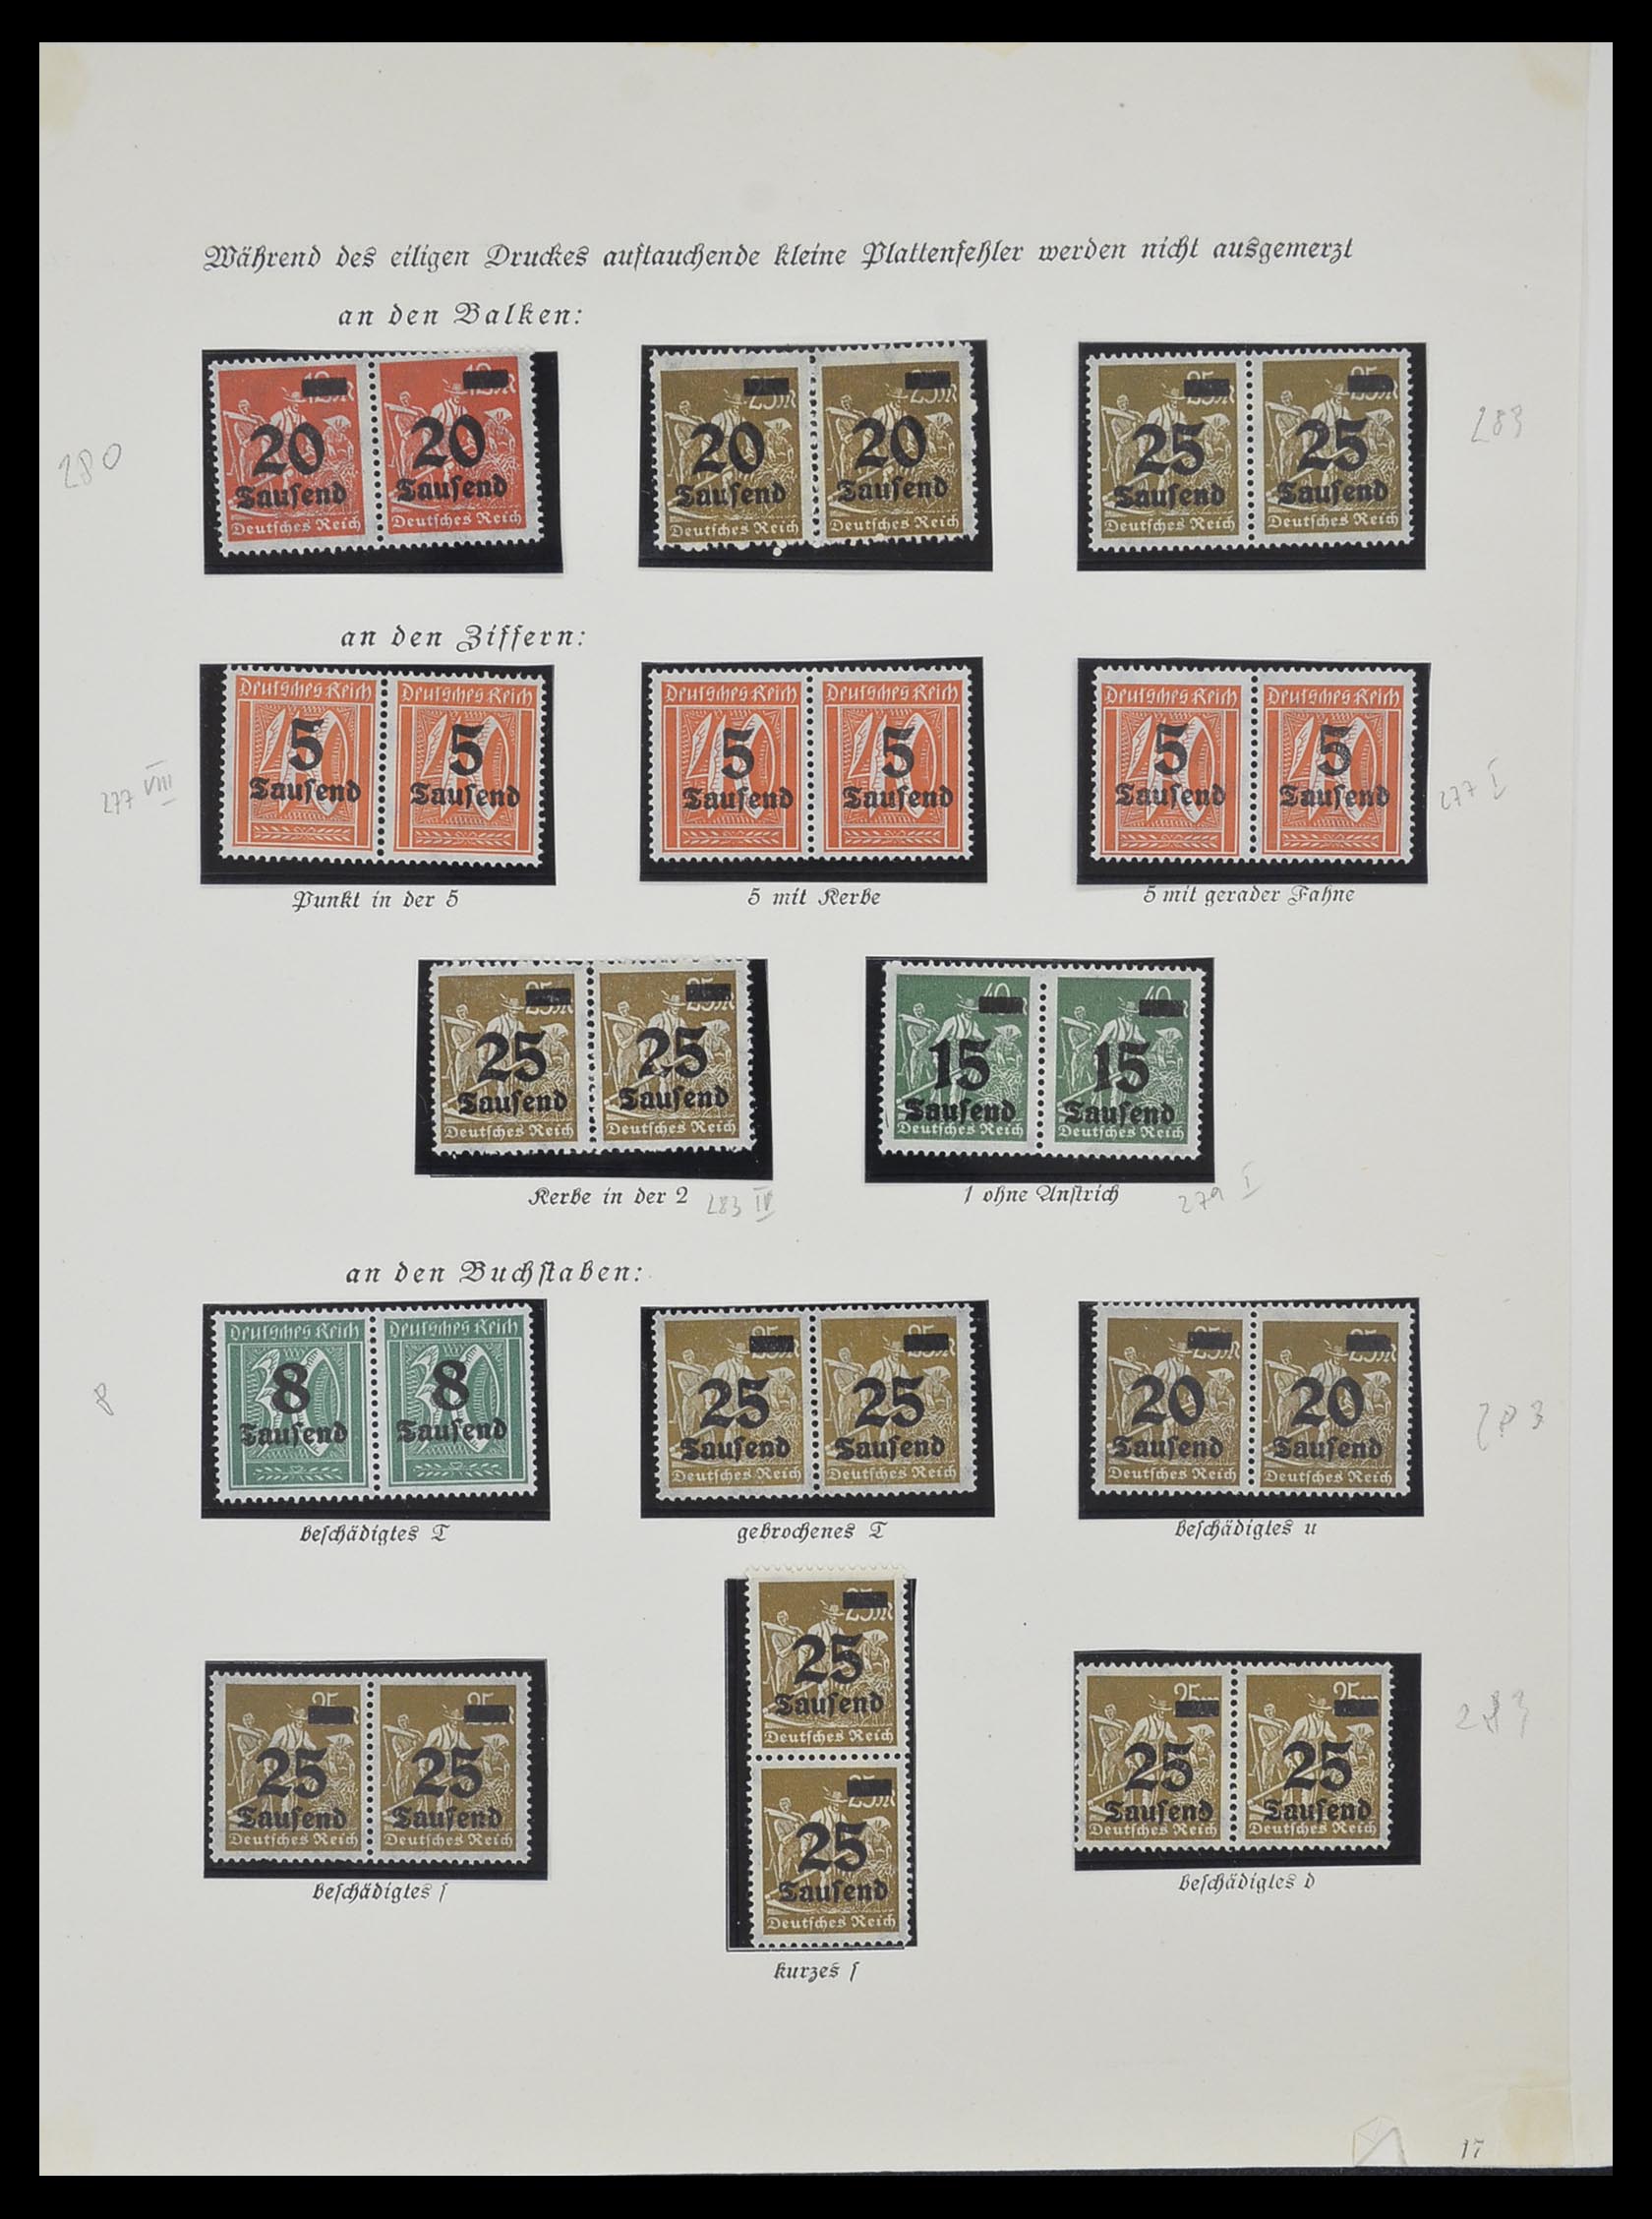 33957 007 - Stamp collection 33957 German Reich infla 1923.